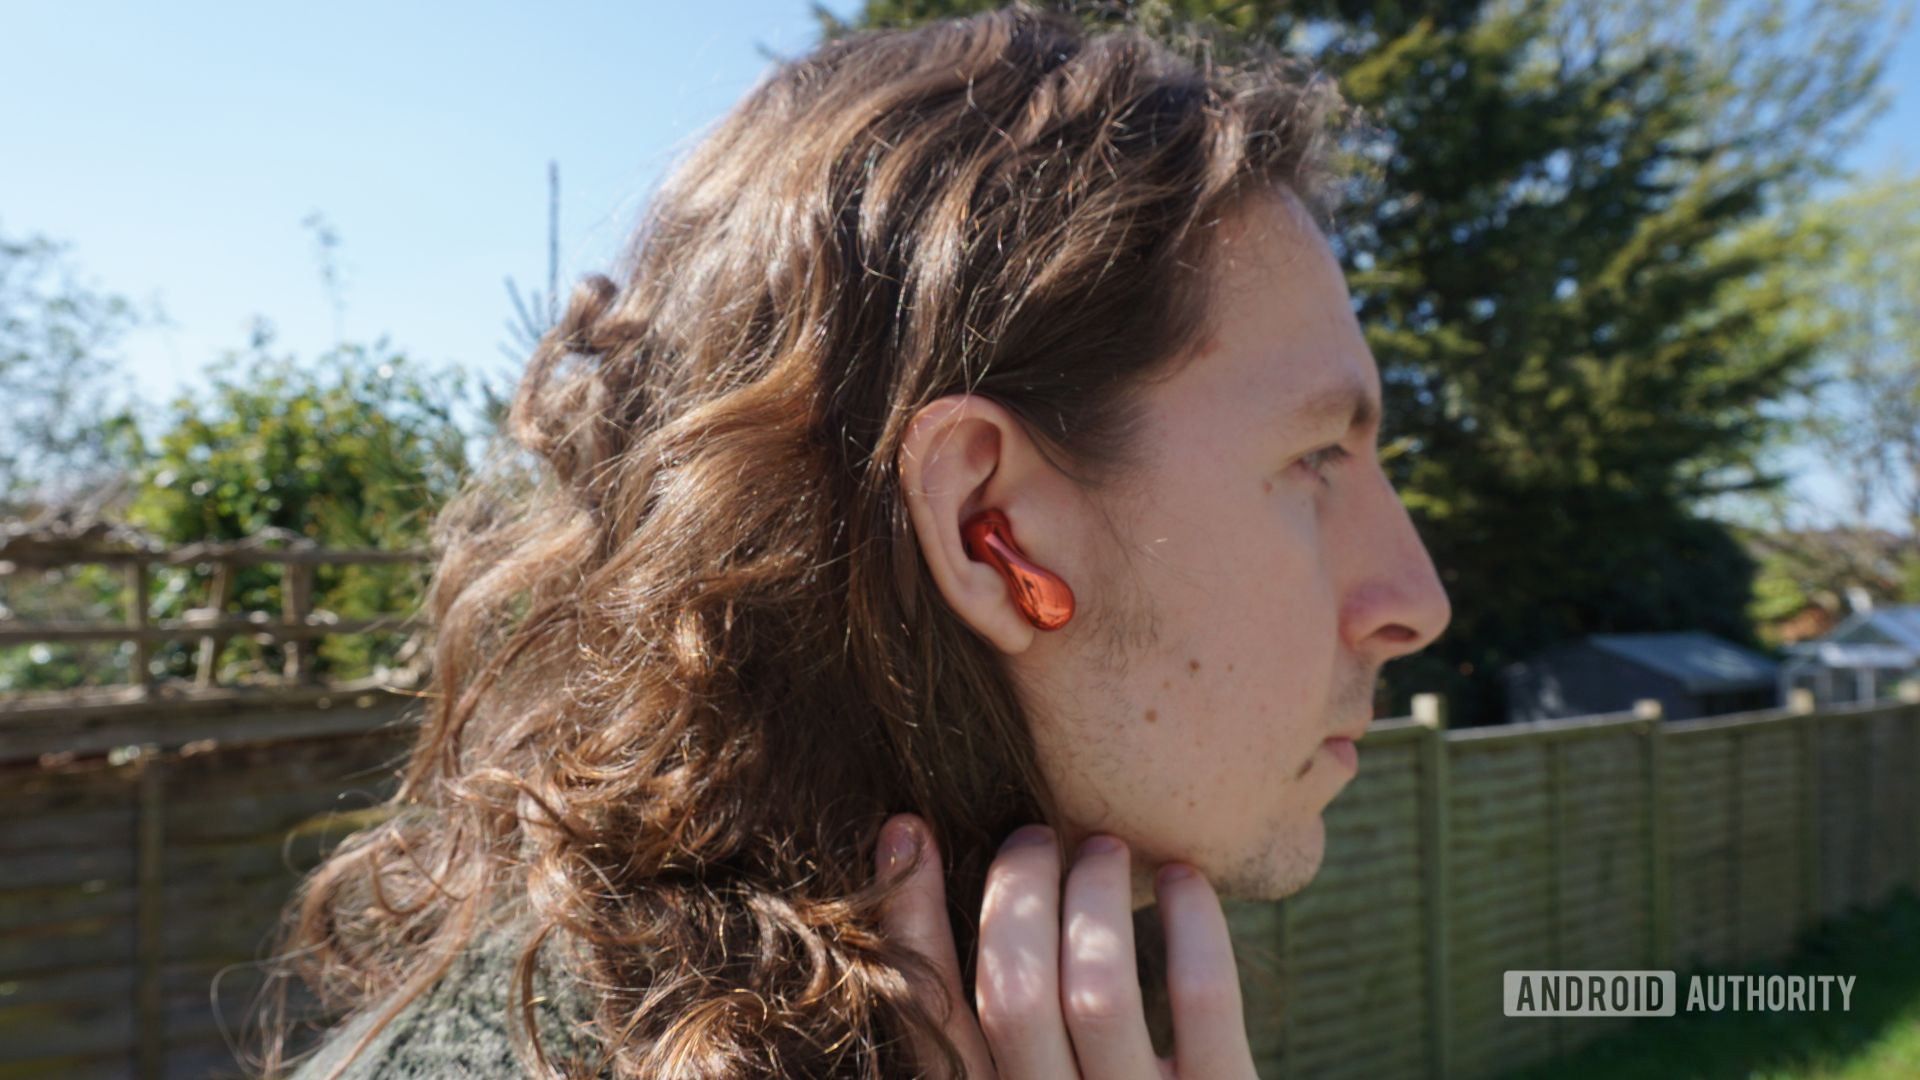 Acurrucarse diamante Ministerio HUAWEI FreeBuds 5 review: Bold and comfortable open-fit earbuds